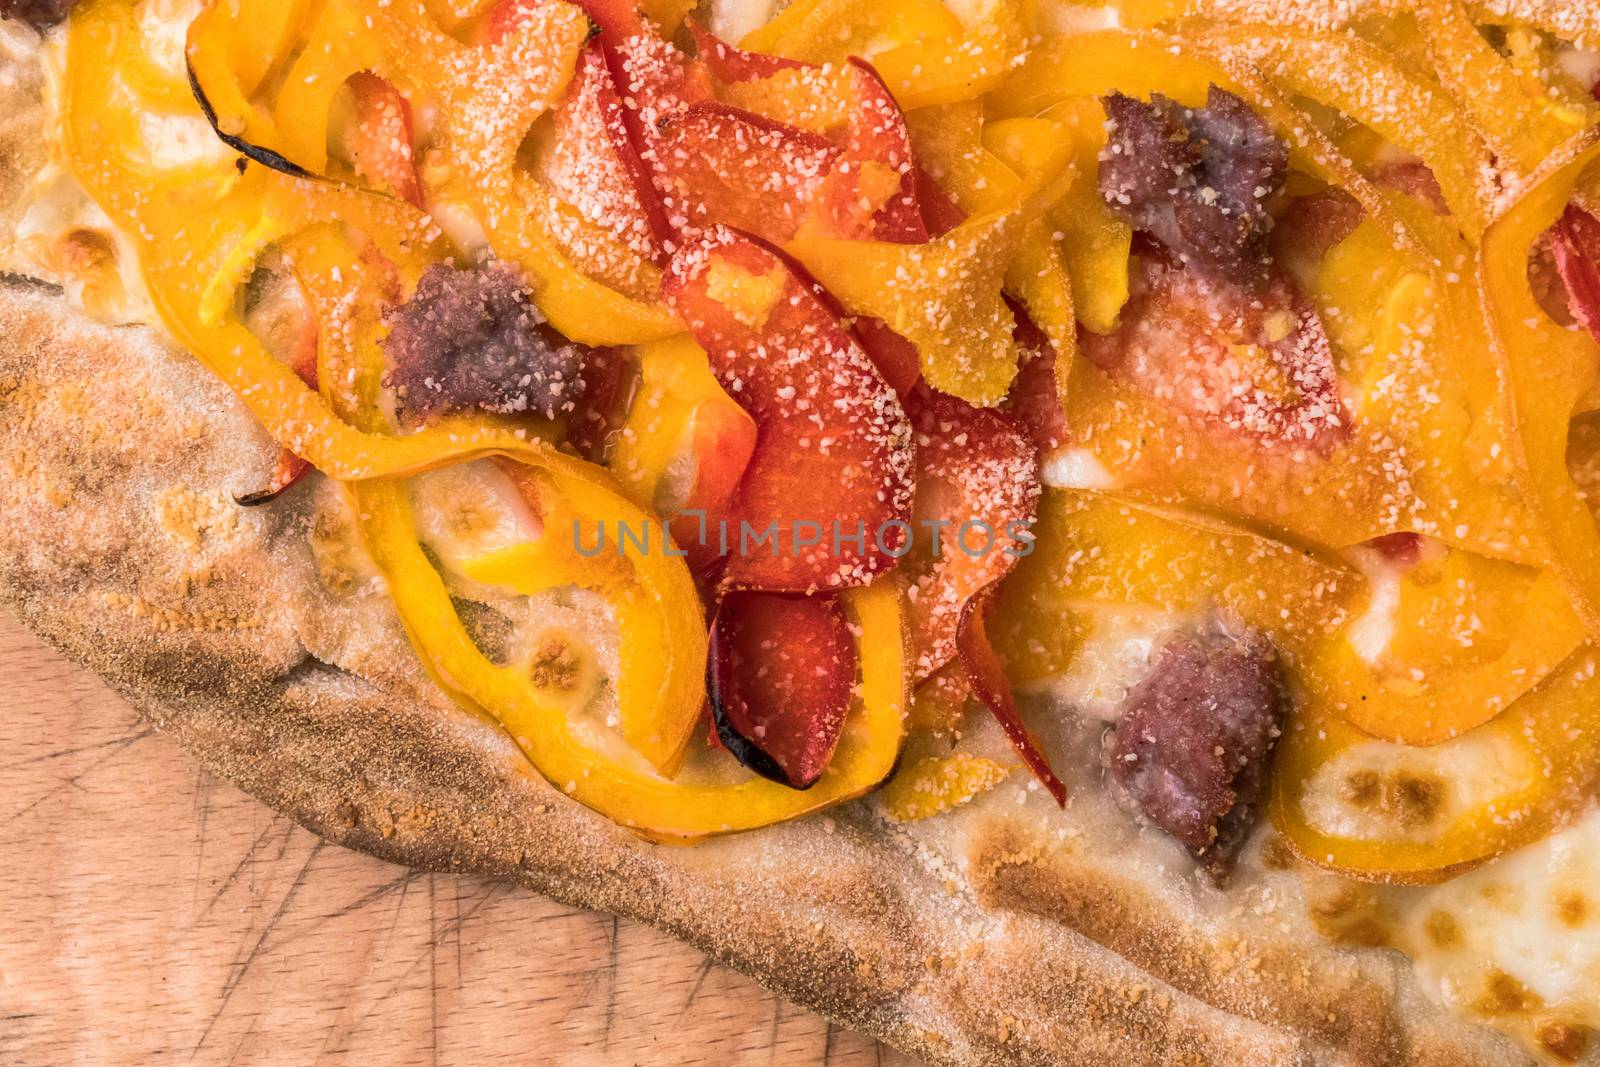 Pizza with bell peppers, sausages, mozzarella and parmesan cheese on rustic wooden background. Top view and close-up of piece.